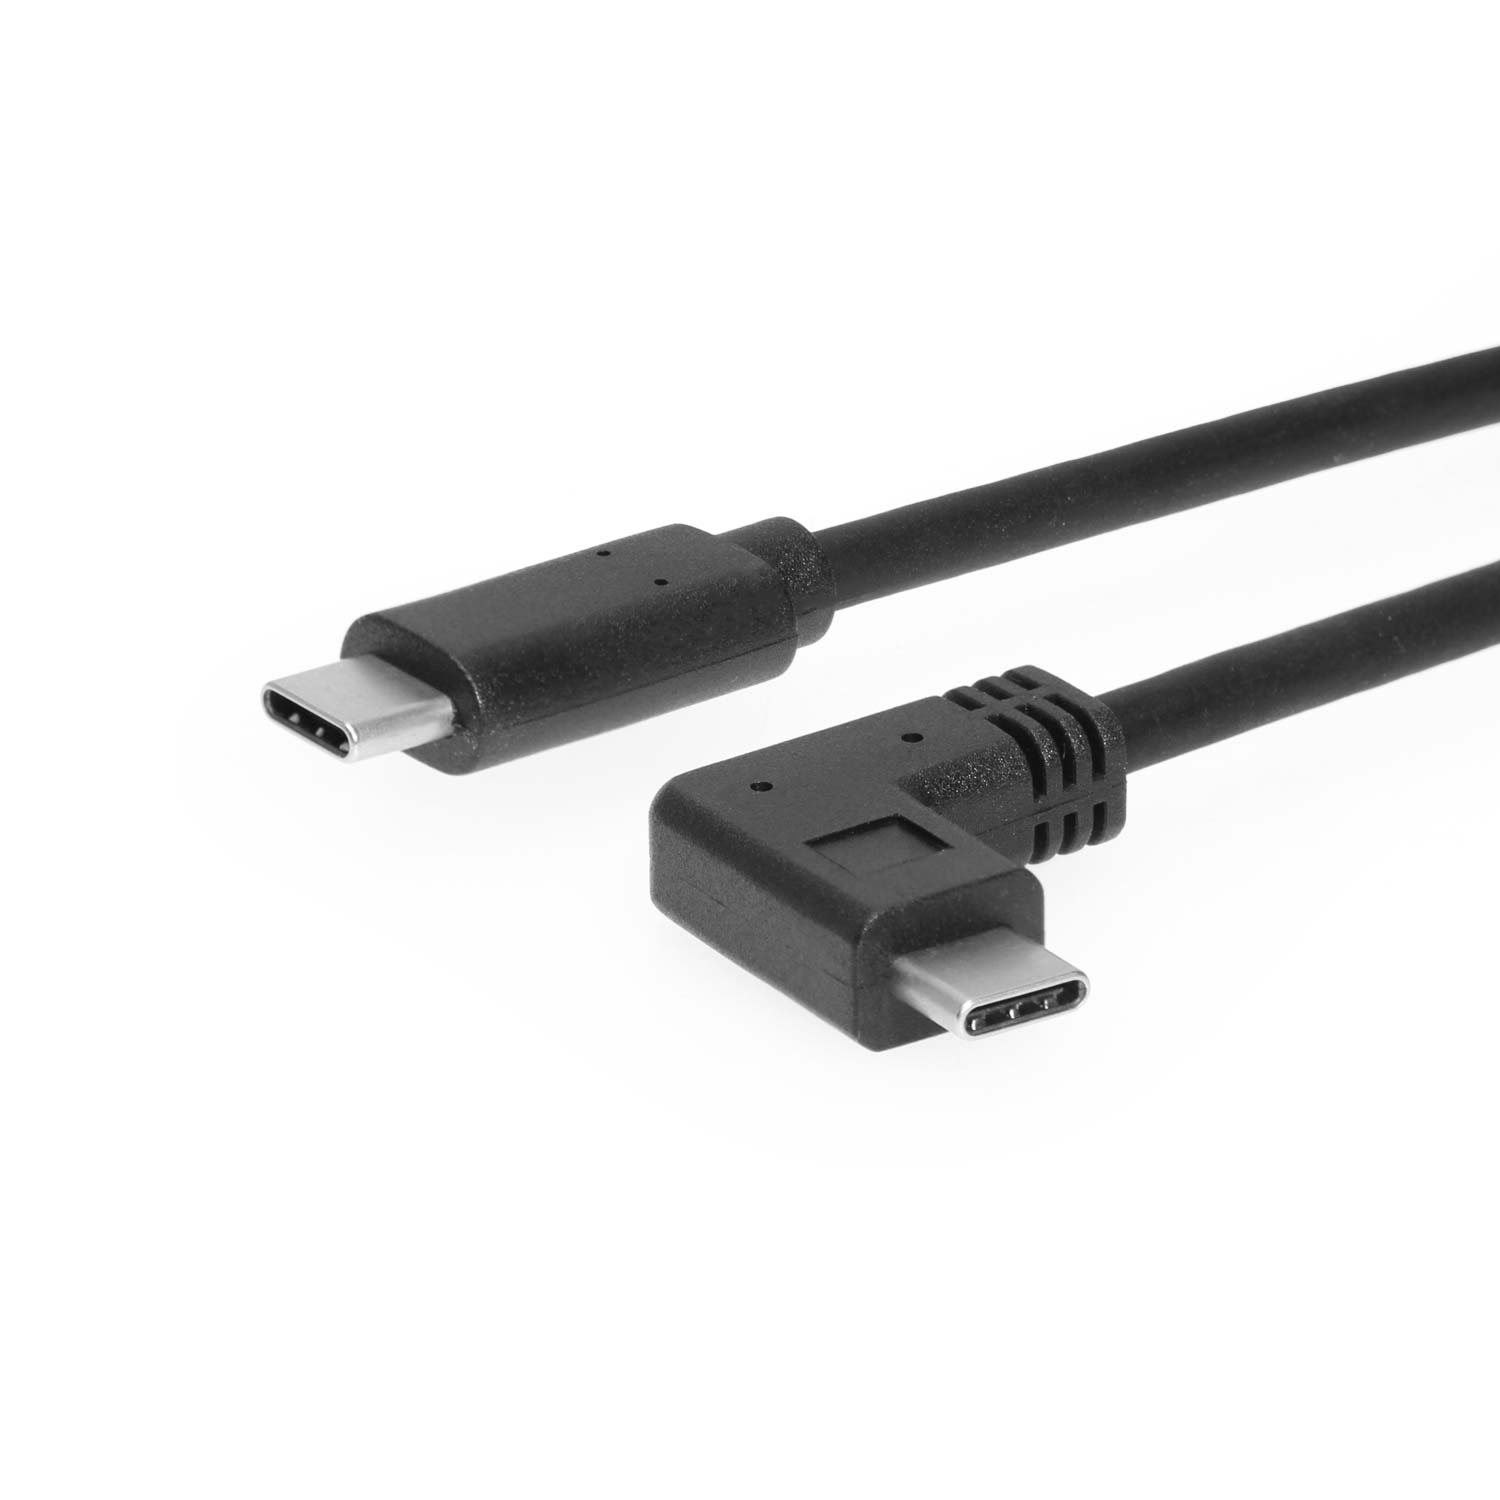 Cable 1m USB Tipo-C a USB Tipo-C 3.1 (10Gbps).